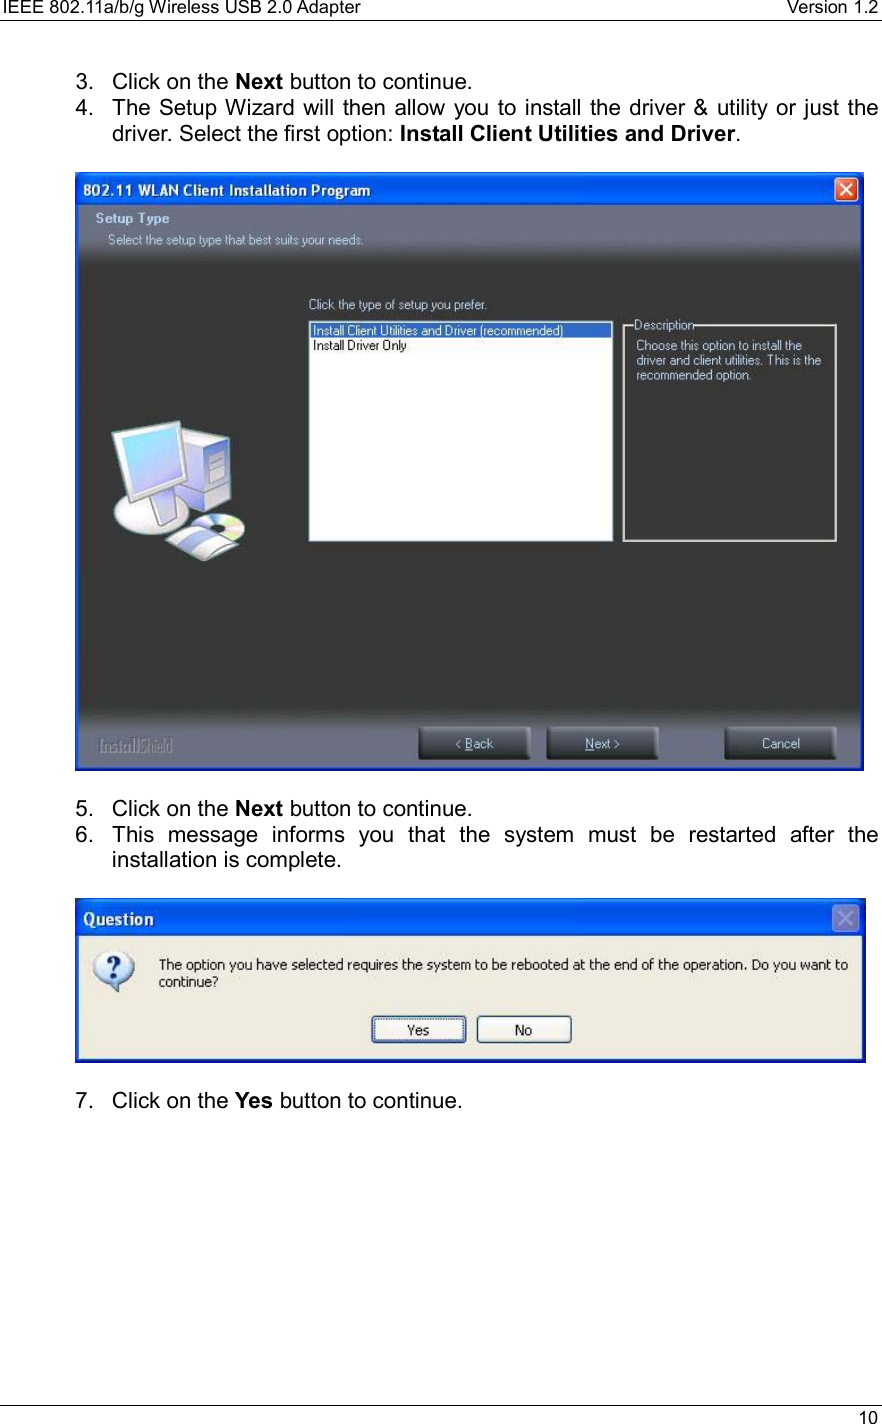 IEEE 802.11a/b/g Wireless USB 2.0 Adapter    Version 1.2   10  3.  Click on the Next button to continue.  4.  The Setup Wizard will then allow you to install the driver &amp; utility or just the driver. Select the first option: Install Client Utilities and Driver.     5.  Click on the Next button to continue.  6.  This message informs you that the system must be restarted after the installation is complete.     7.  Click on the Yes button to continue.    